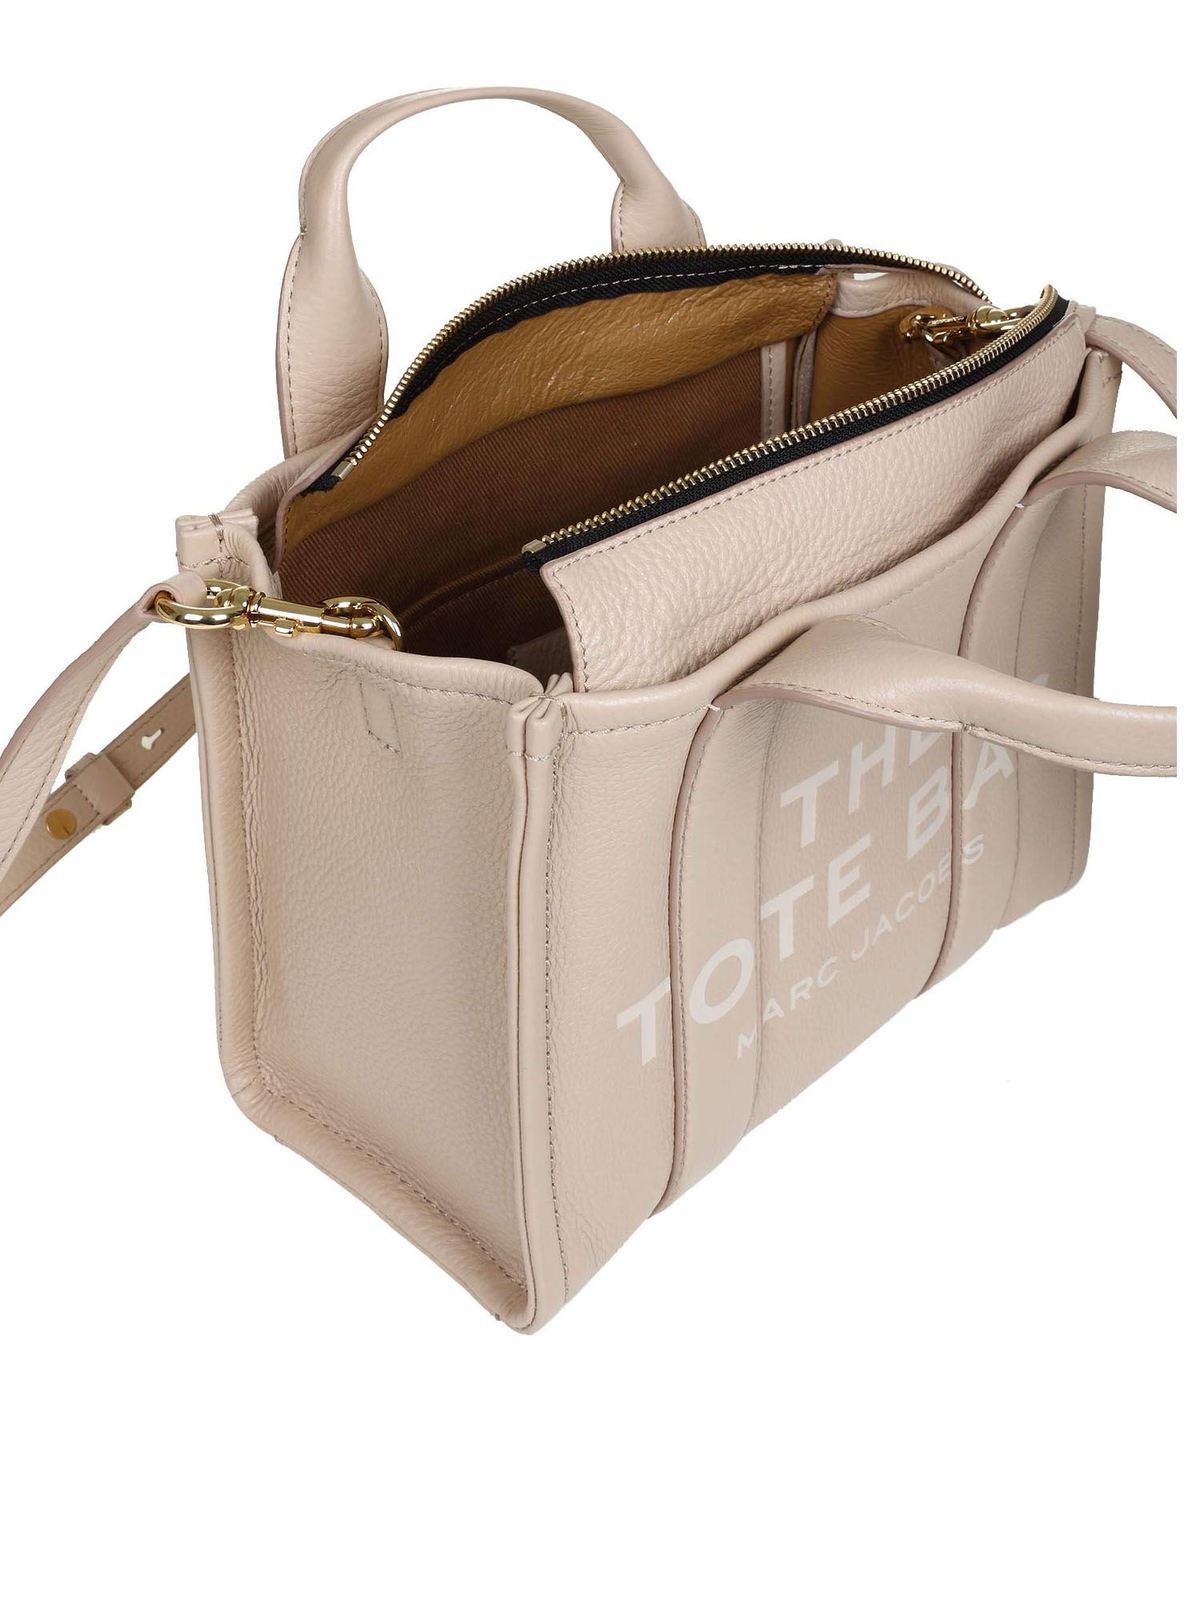 Marc Jacobs Beige Leather The Mini Traveler Tote Bag